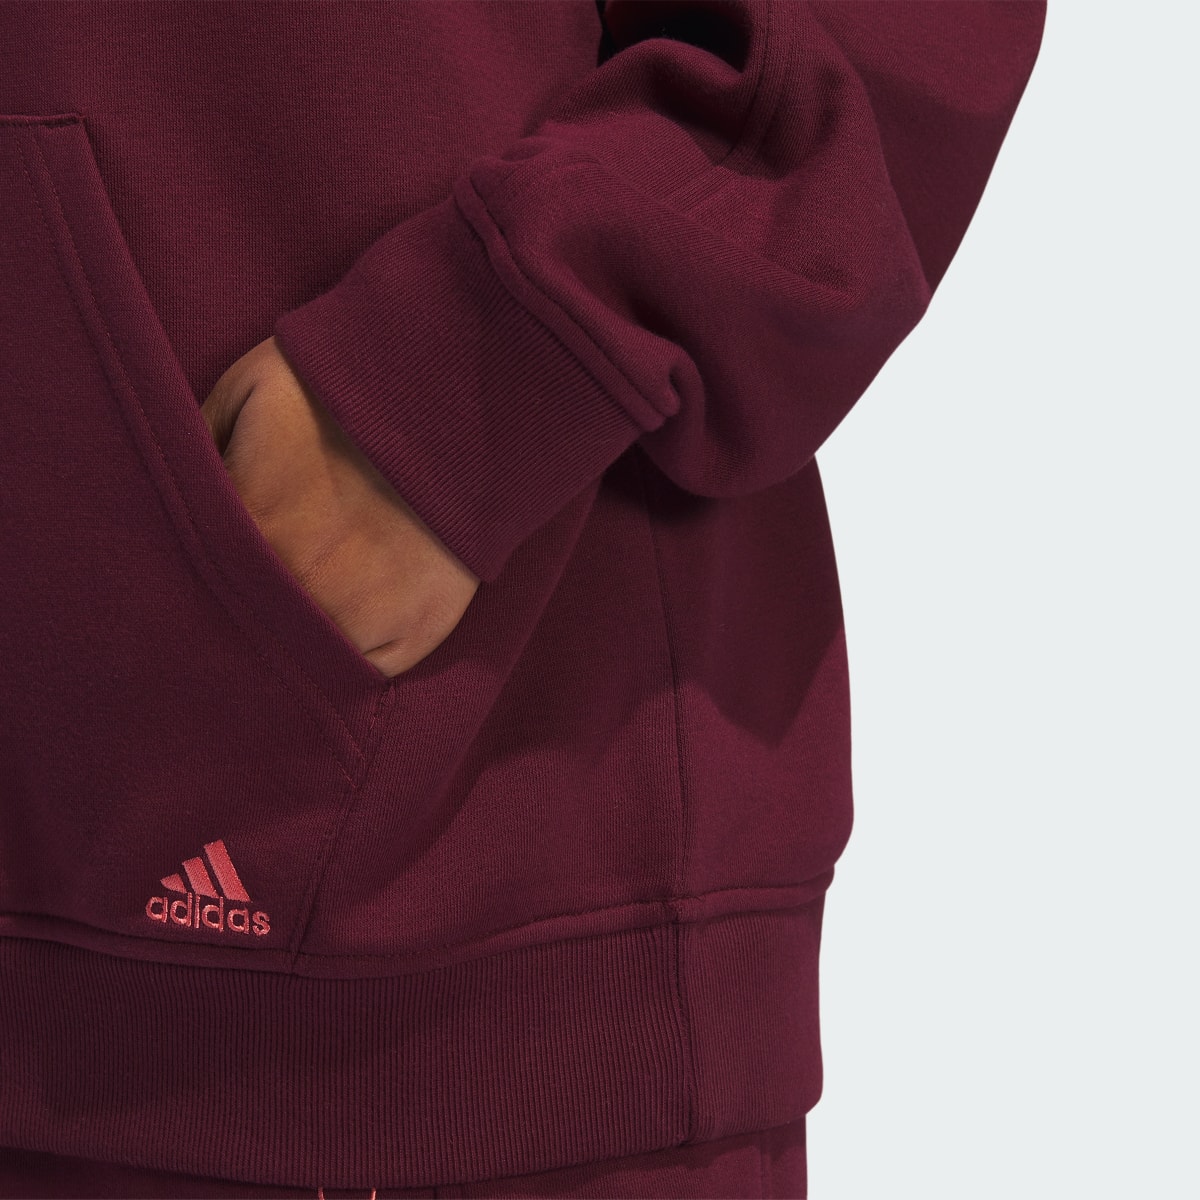 Adidas ALL SZN Valentine's Day Pullover Hoodie. 7